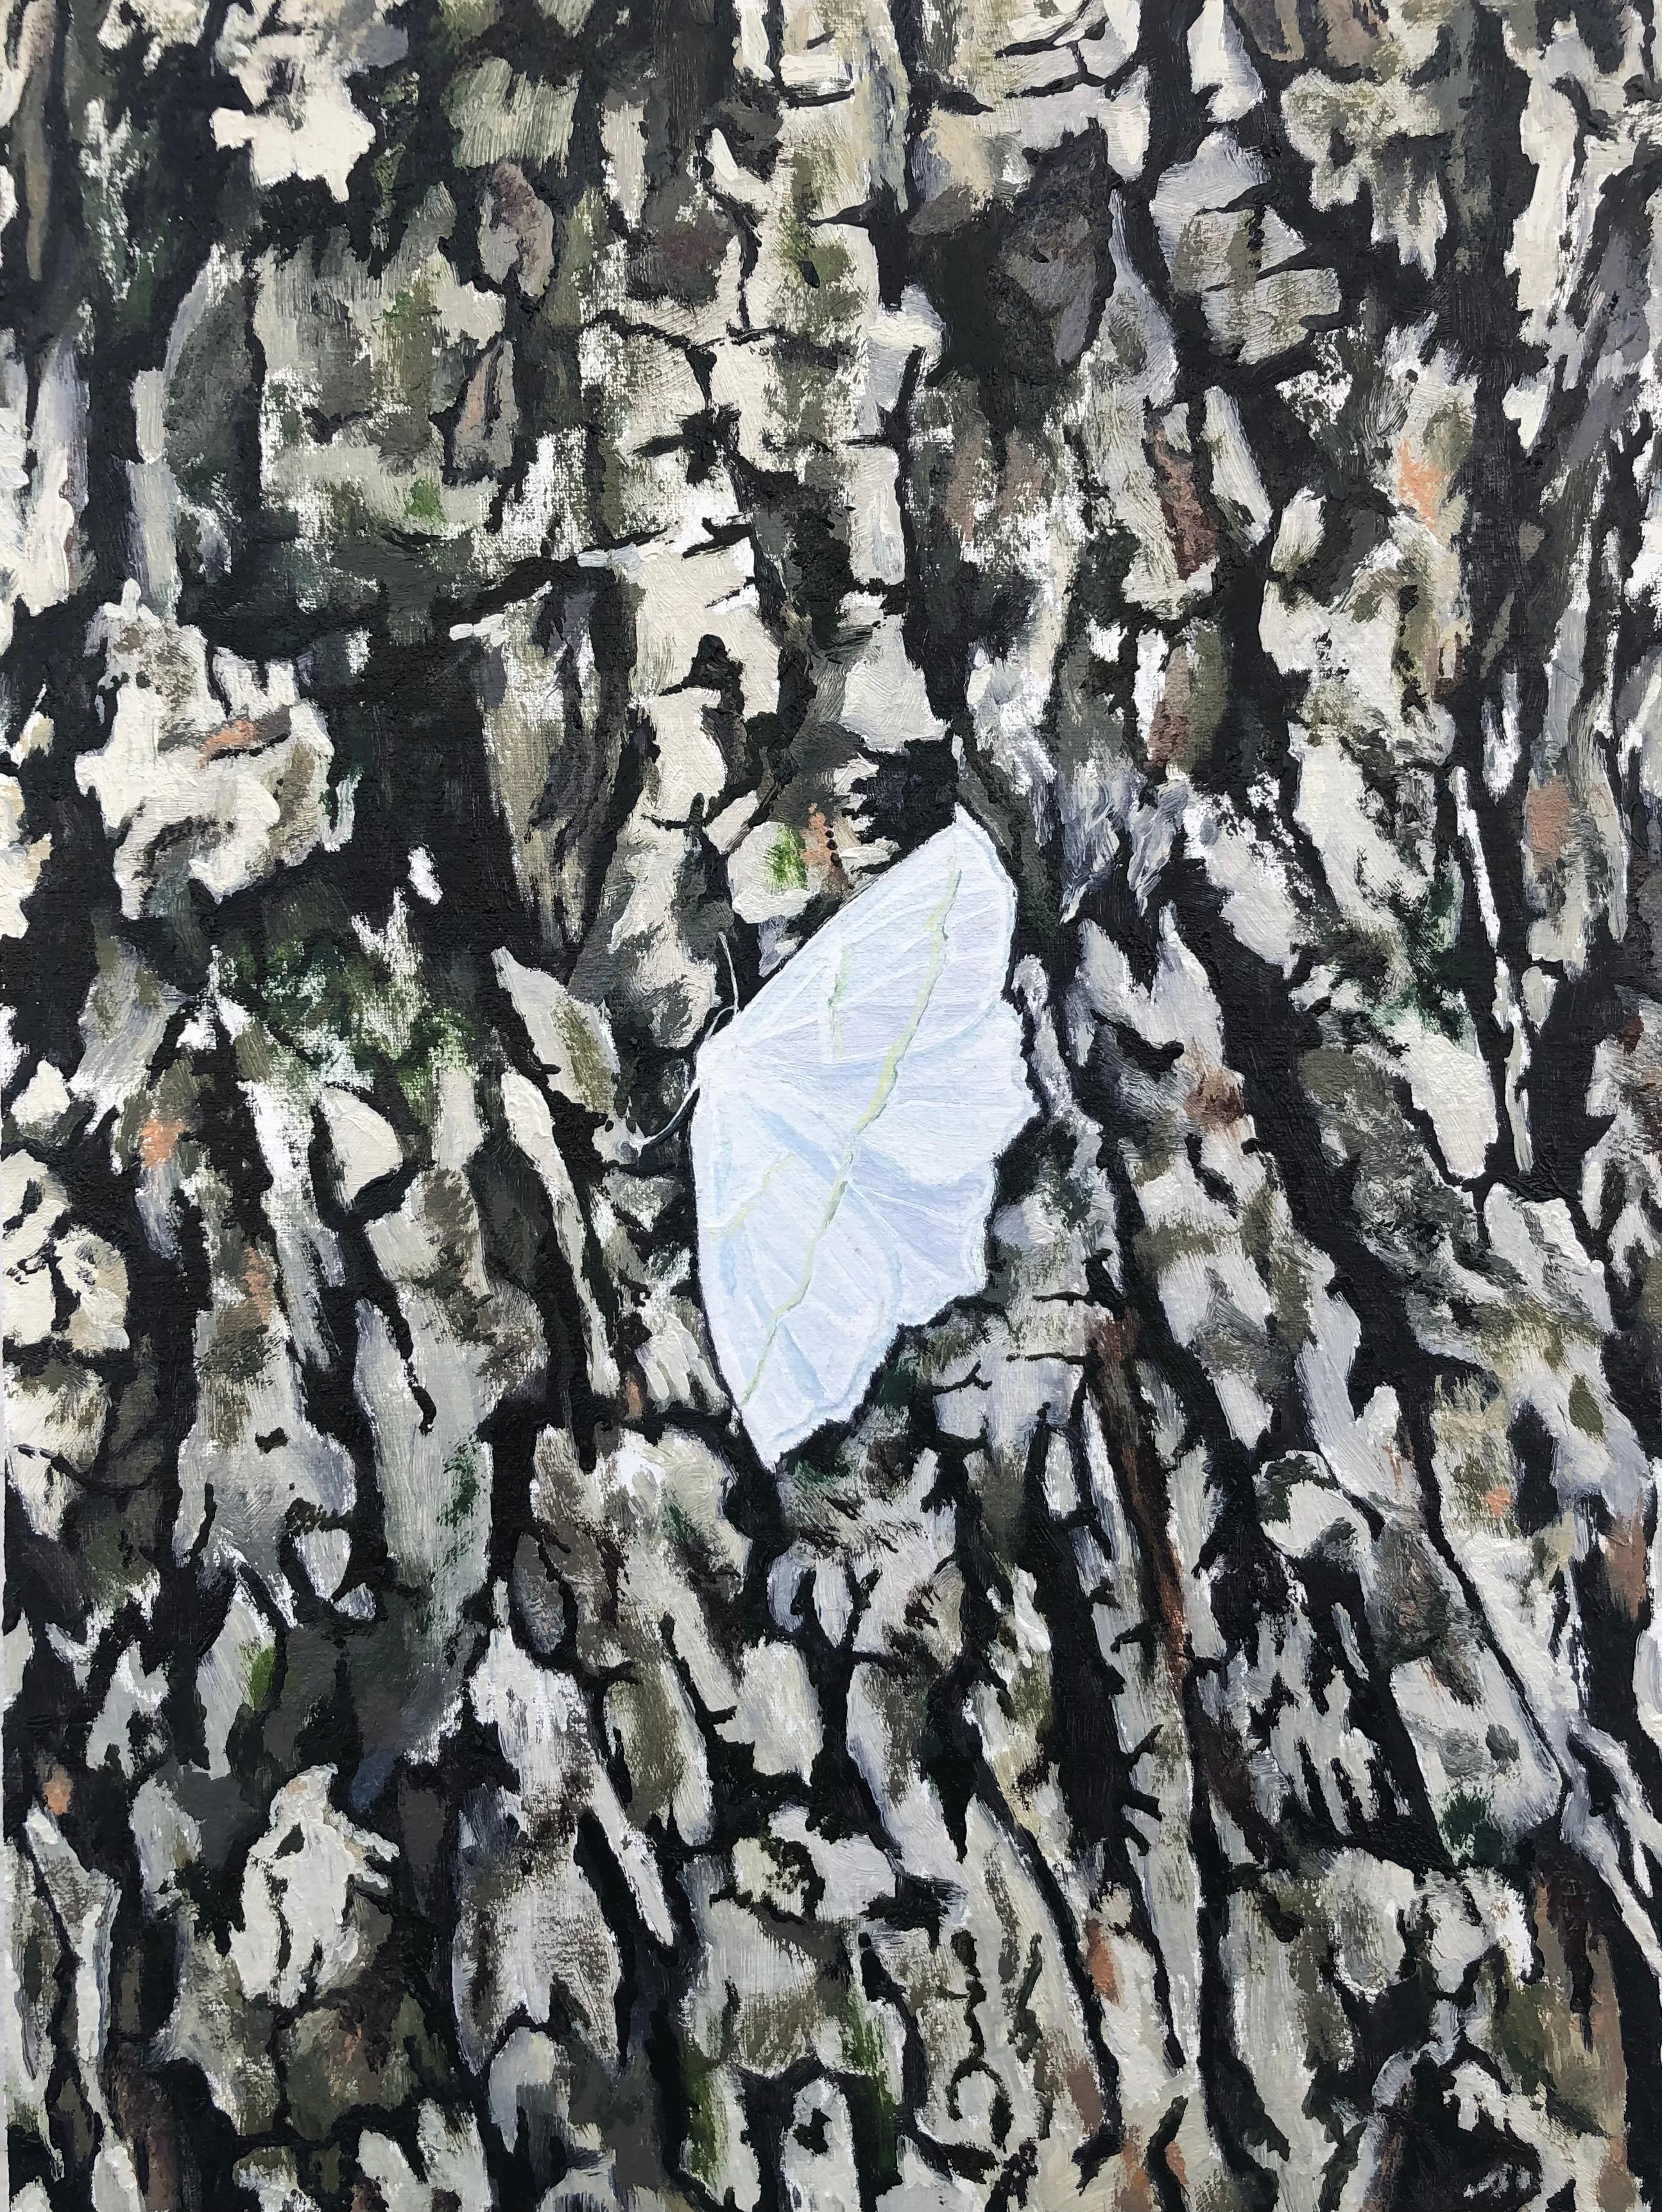 Amanda Acker Landscape Painting - Pale Beauty, Bright White Moth on Beige Gray Tree Bark, Winged Insect